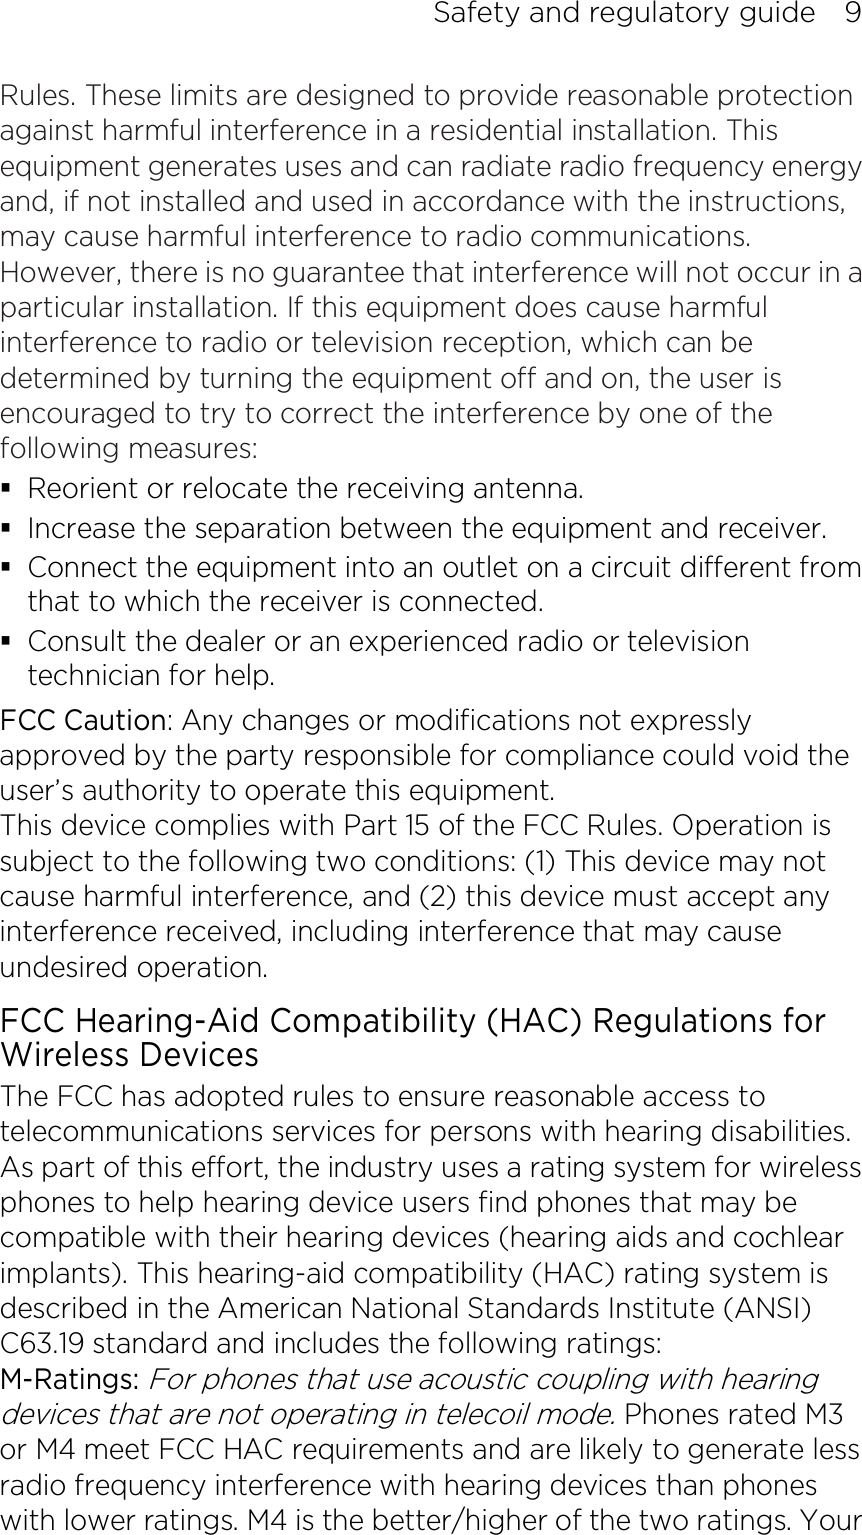 Safety and regulatory guide    9 Rules. These limits are designed to provide reasonable protection against harmful interference in a residential installation. This equipment generates uses and can radiate radio frequency energy and, if not installed and used in accordance with the instructions, may cause harmful interference to radio communications. However, there is no guarantee that interference will not occur in a particular installation. If this equipment does cause harmful interference to radio or television reception, which can be determined by turning the equipment off and on, the user is encouraged to try to correct the interference by one of the following measures:  Reorient or relocate the receiving antenna.    Increase the separation between the equipment and receiver.  Connect the equipment into an outlet on a circuit different from that to which the receiver is connected.  Consult the dealer or an experienced radio or television technician for help.   FCC Caution: Any changes or modifications not expressly approved by the party responsible for compliance could void the user’s authority to operate this equipment. This device complies with Part 15 of the FCC Rules. Operation is subject to the following two conditions: (1) This device may not cause harmful interference, and (2) this device must accept any interference received, including interference that may cause undesired operation. FCC Hearing-Aid Compatibility (HAC) Regulations for Wireless Devices The FCC has adopted rules to ensure reasonable access to telecommunications services for persons with hearing disabilities. As part of this effort, the industry uses a rating system for wireless phones to help hearing device users find phones that may be compatible with their hearing devices (hearing aids and cochlear implants). This hearing-aid compatibility (HAC) rating system is described in the American National Standards Institute (ANSI) C63.19 standard and includes the following ratings: M-Ratings: For phones that use acoustic coupling with hearing devices that are not operating in telecoil mode. Phones rated M3 or M4 meet FCC HAC requirements and are likely to generate less radio frequency interference with hearing devices than phones with lower ratings. M4 is the better/higher of the two ratings. Your 